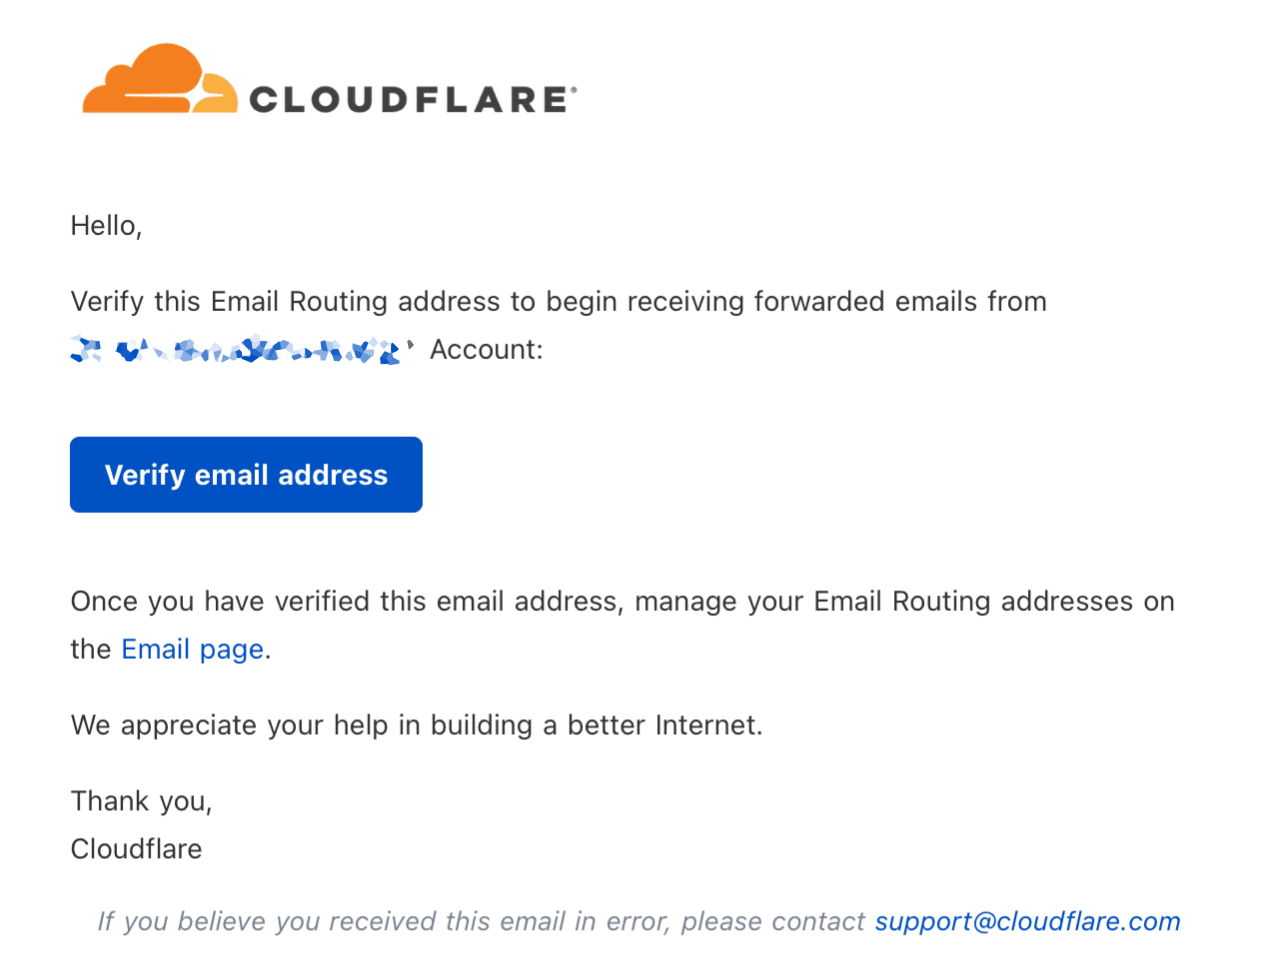 CloudFlare - Email Routing Verification